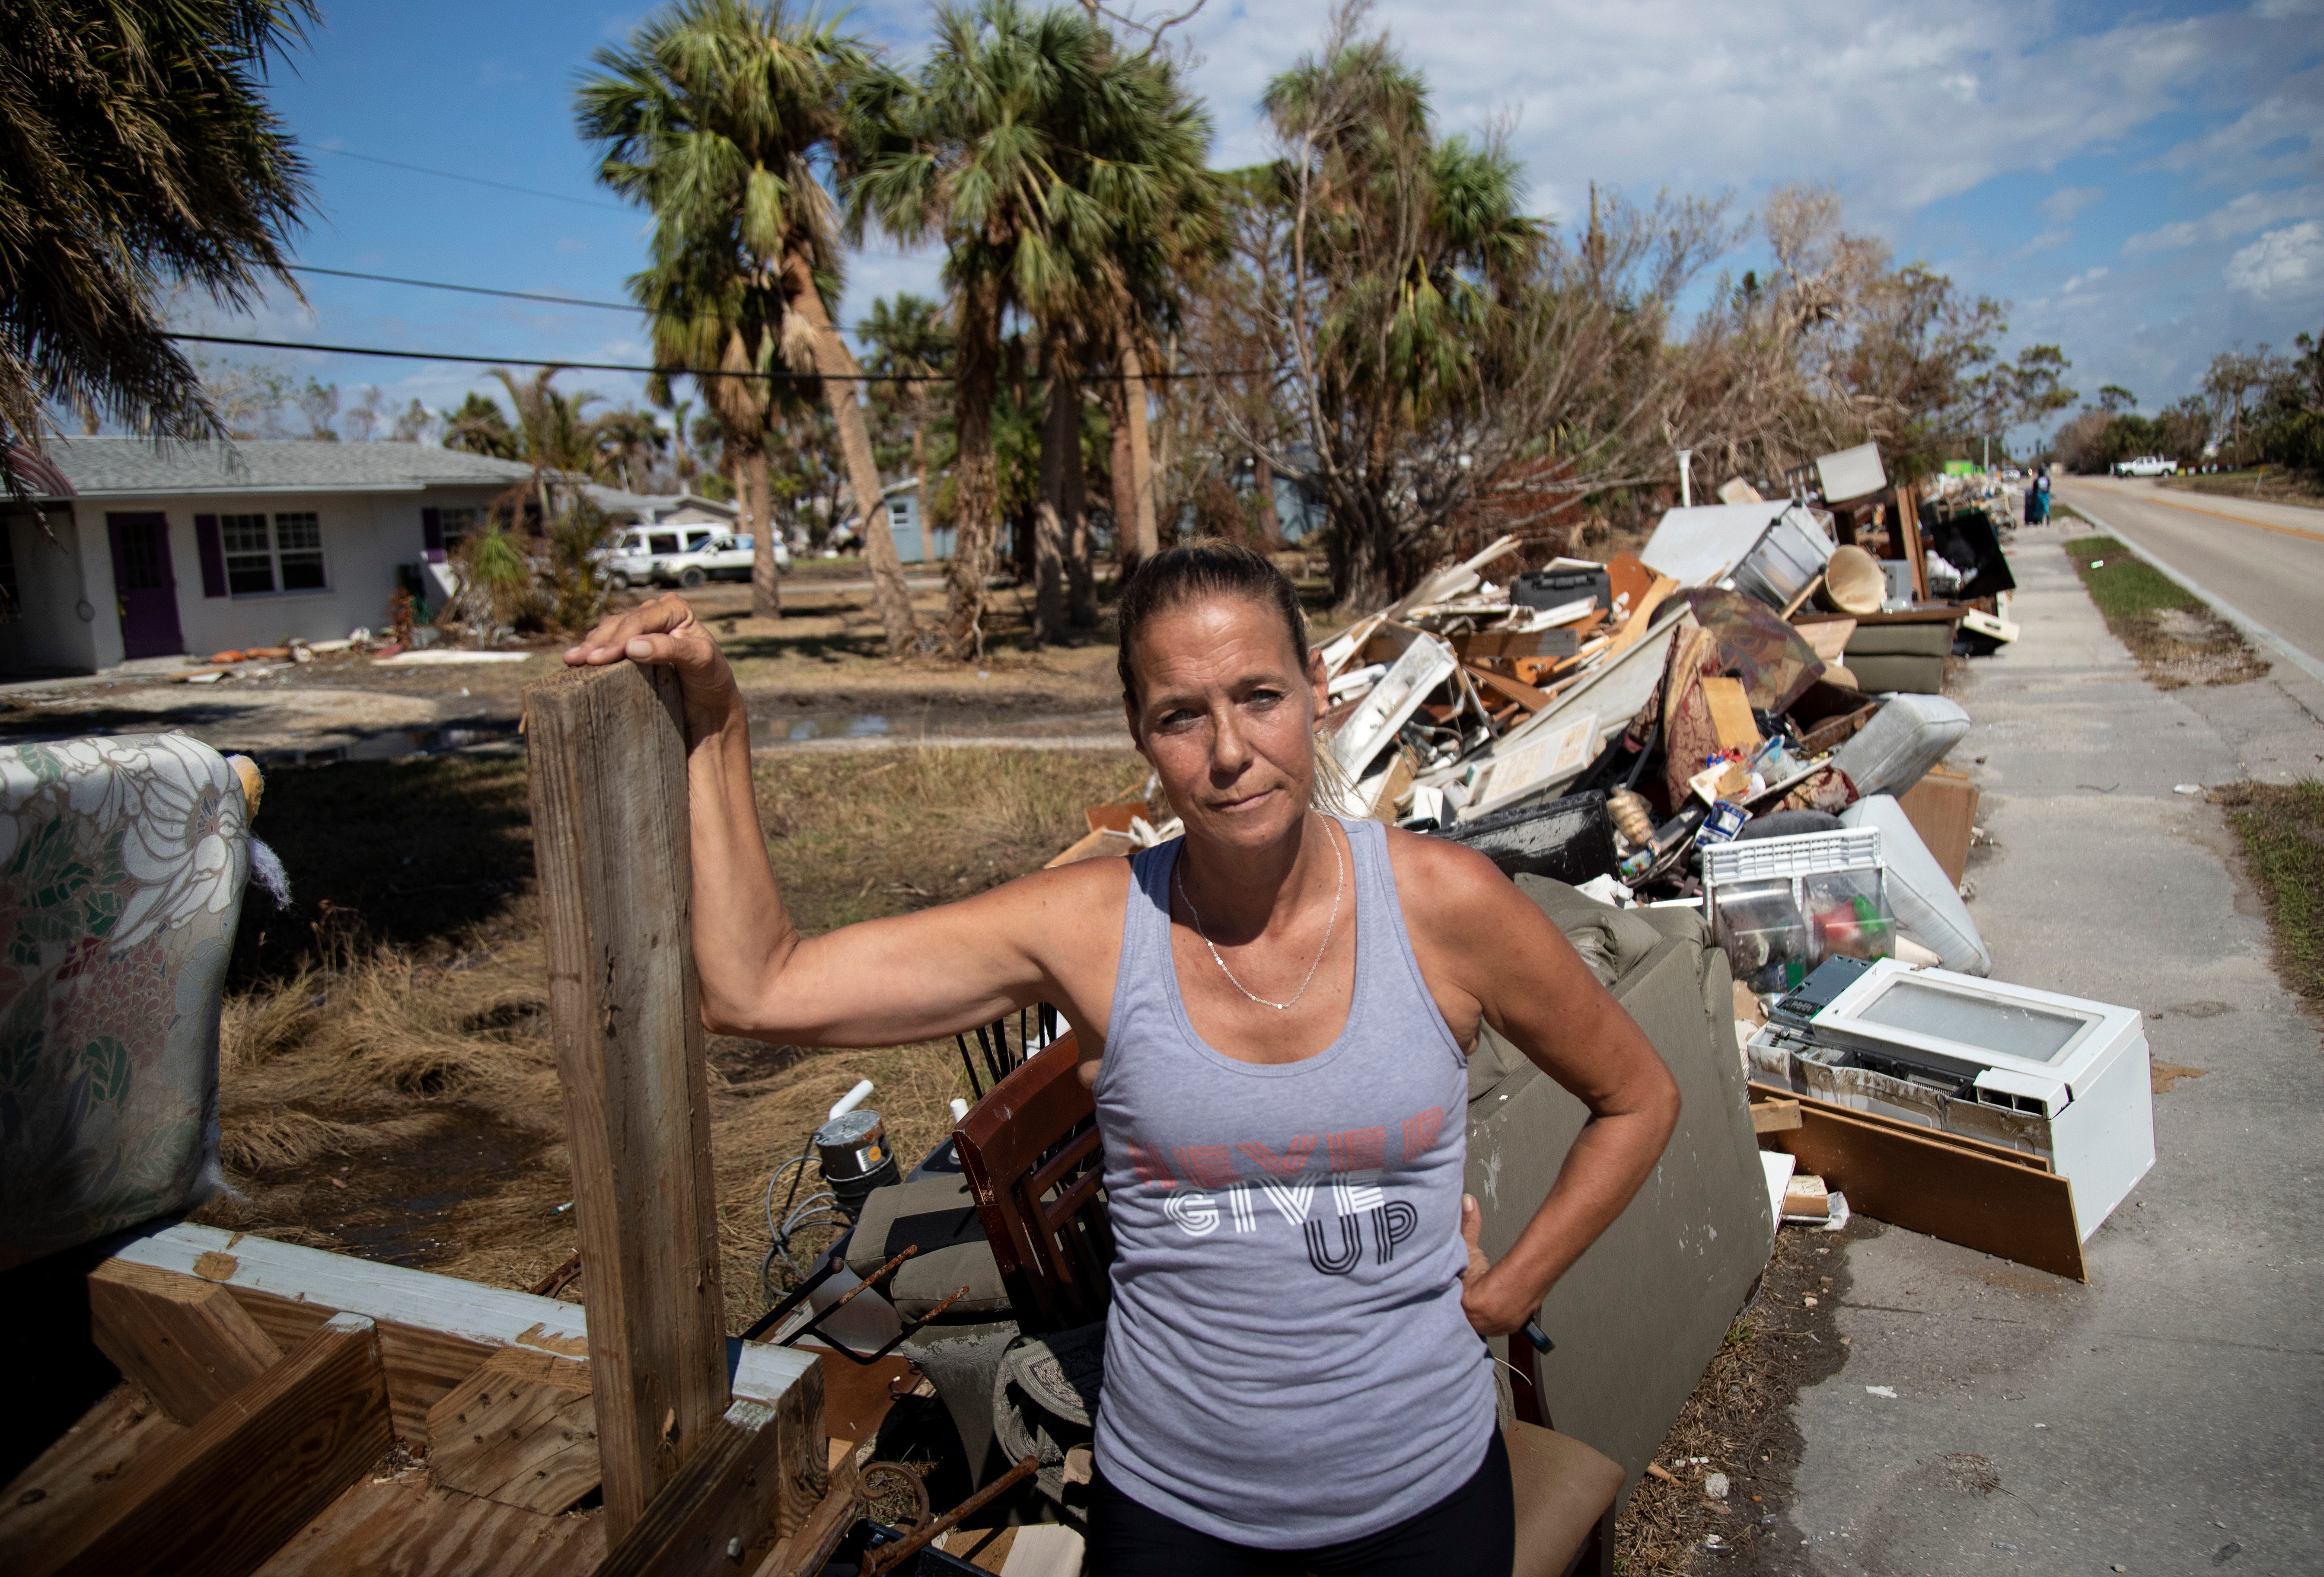 Rachel Helgerson's shirt reads "Never Give Up," and she's ready for a new adventure, but she says it won't be in Fort Myers. "There's nothing left for me here," Helgerson said. She lost everything in the storm surge during Hurricane Ian.